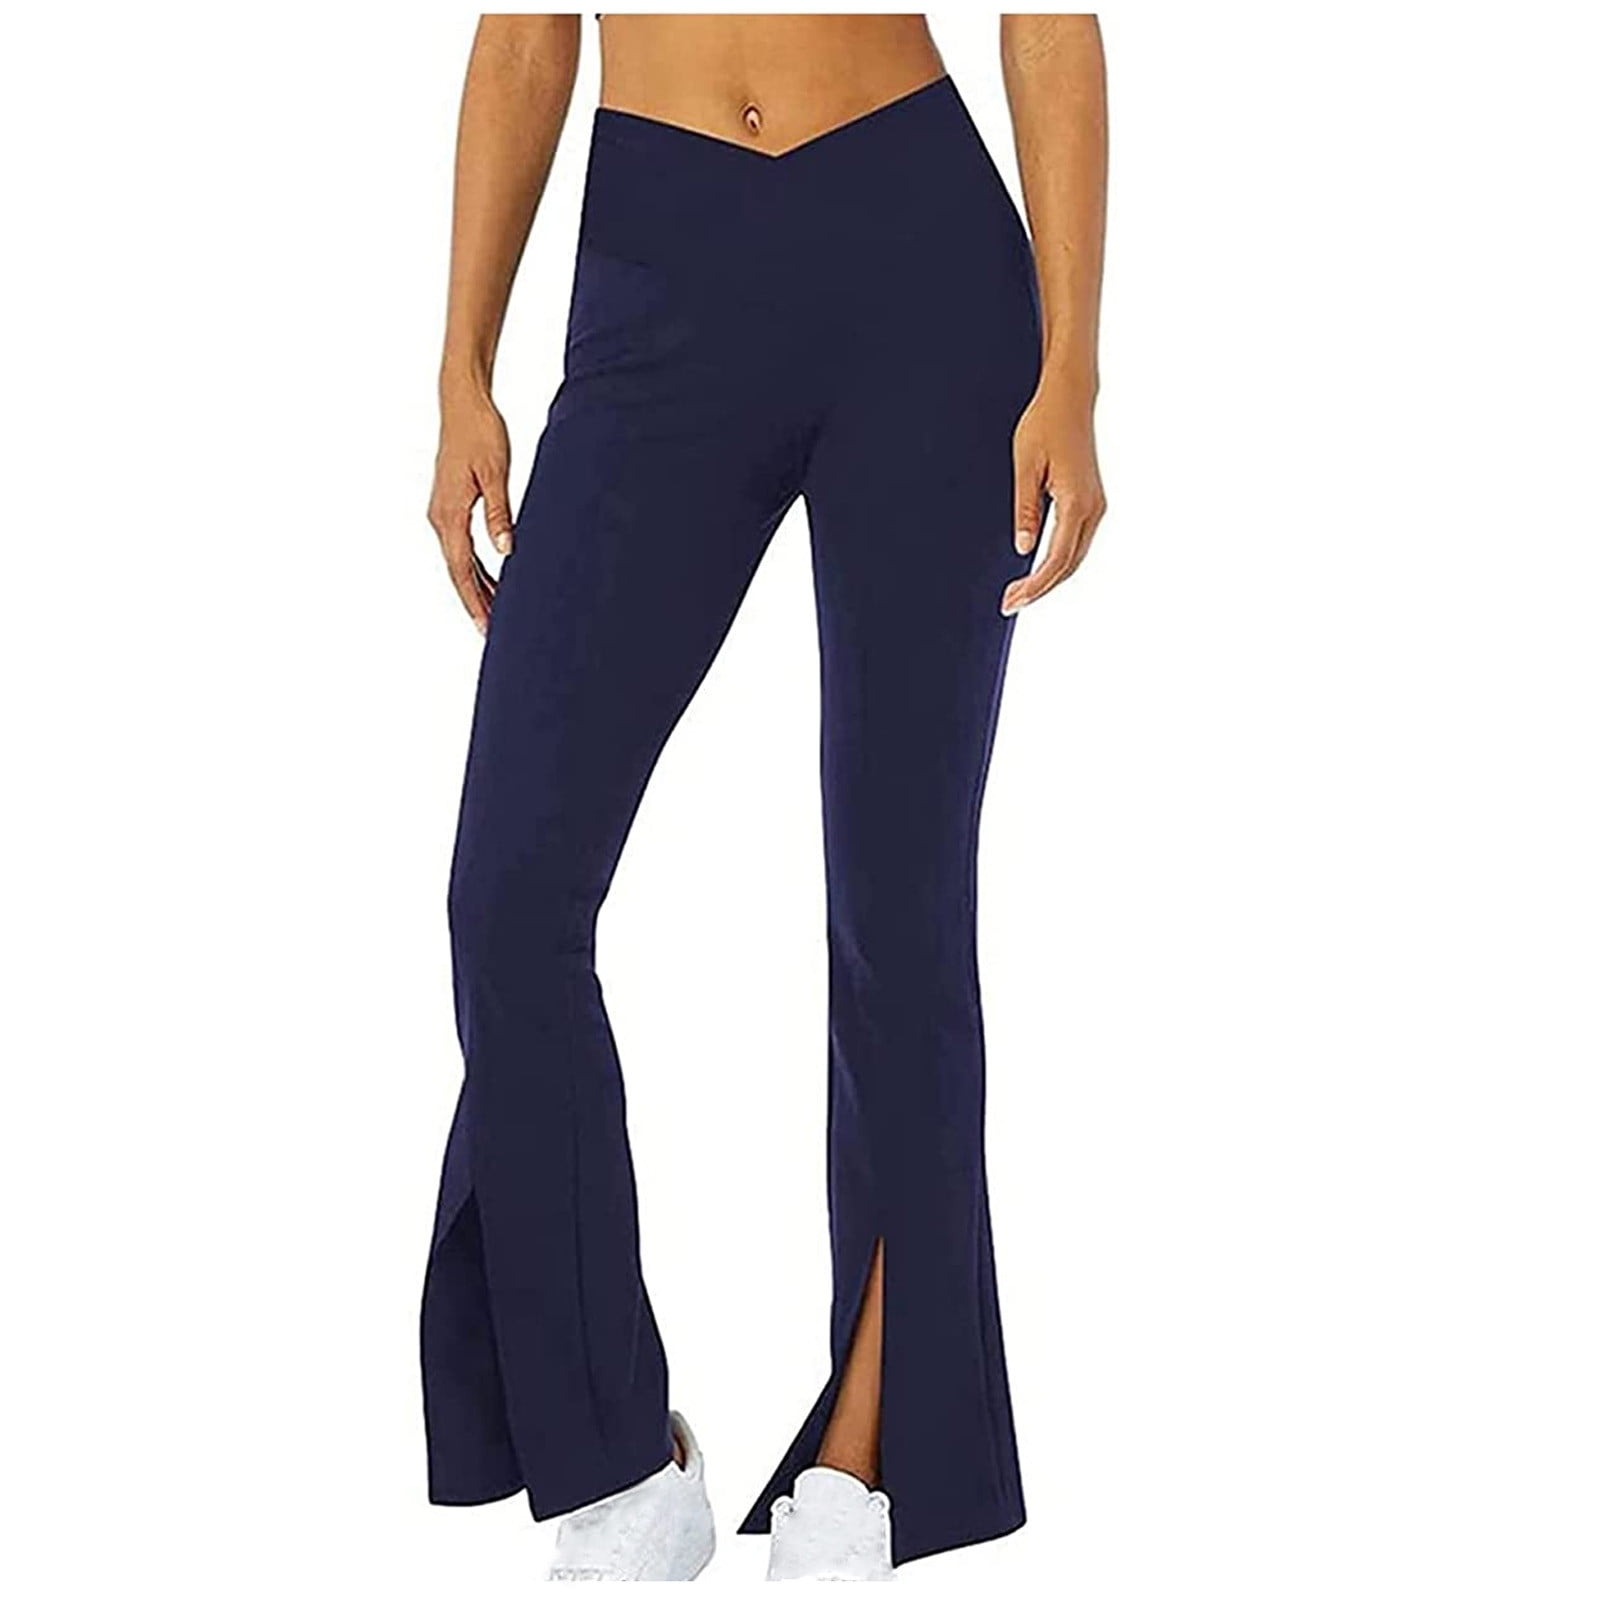 Buy TOPYOGAS Women's Casual Bootleg Yoga Pants V Crossover